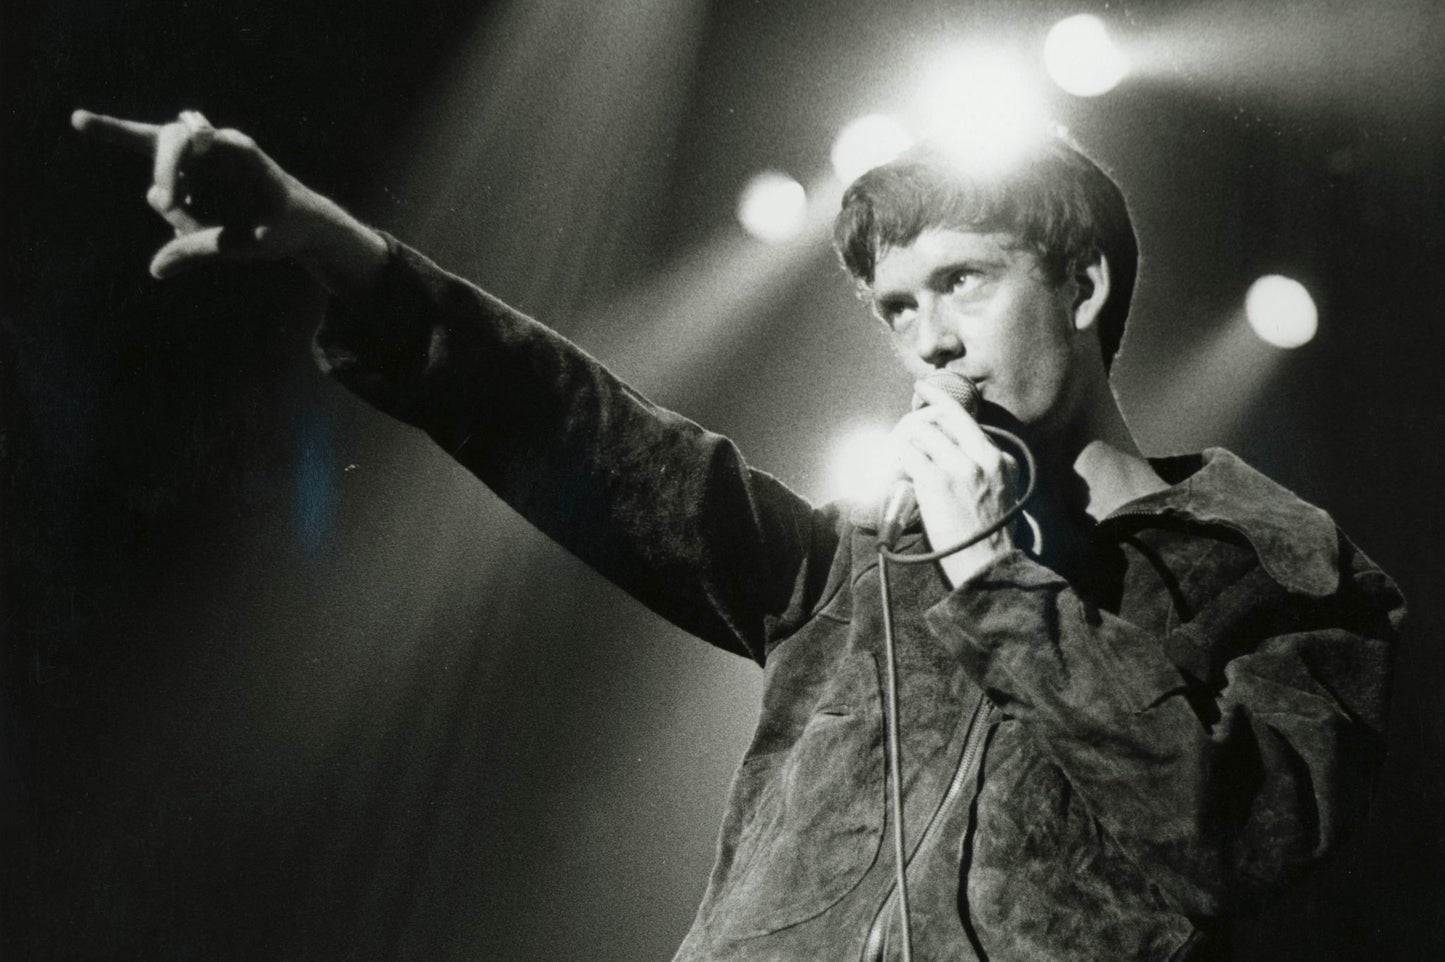 Pulp - Jarvis Cocker Pointing on Stage, England, 1990 Poster